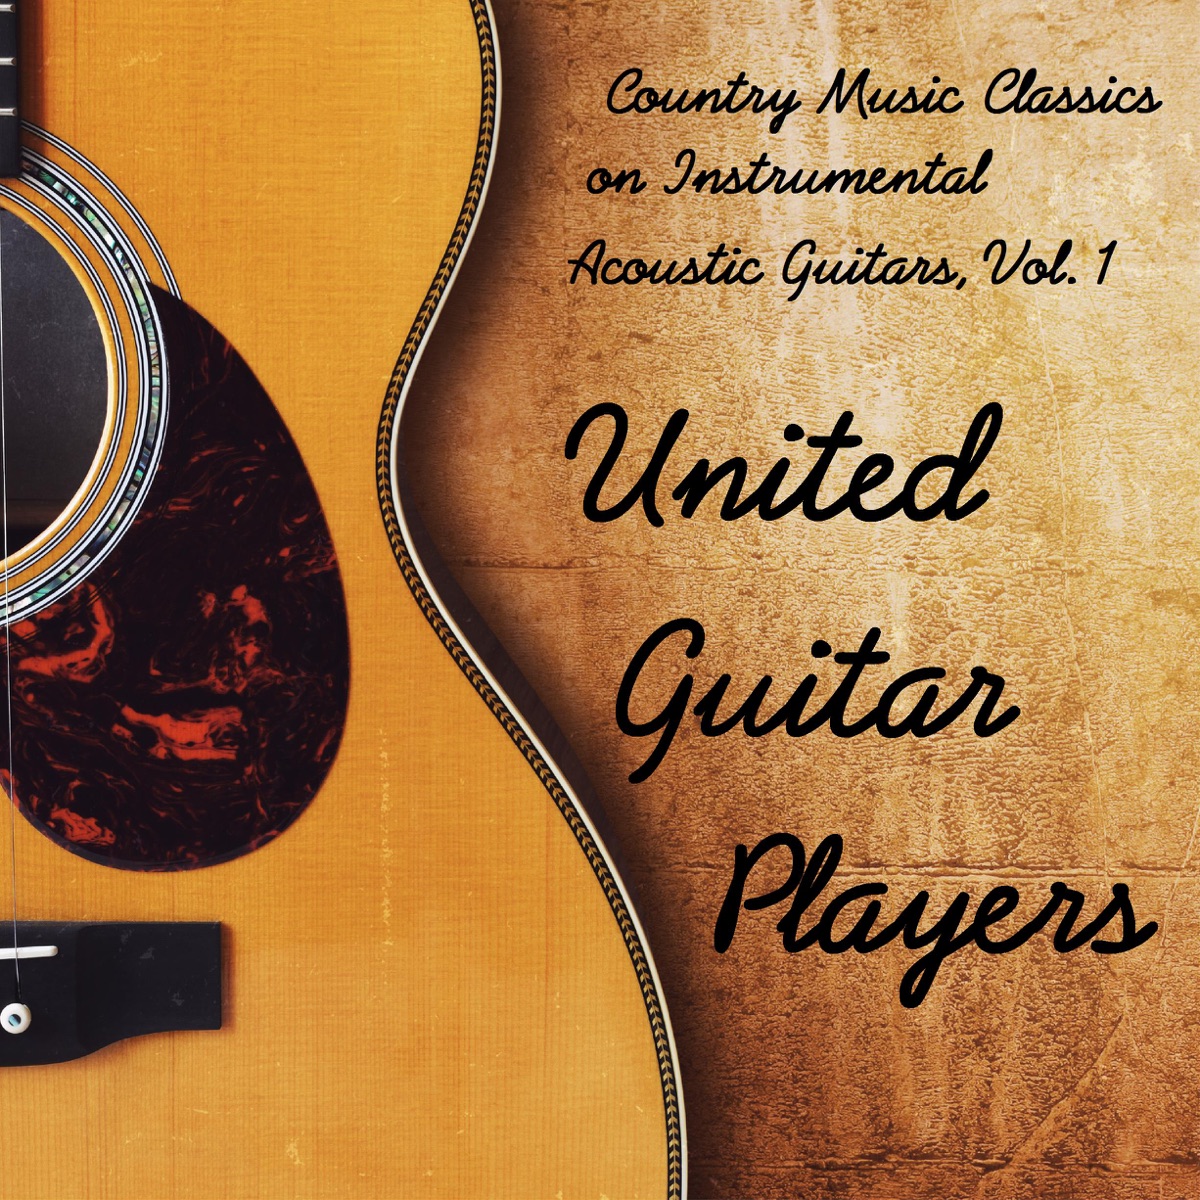 Country Music Classics on Instrumental Acoustic Guitars, Vol. 1 by United  Guitar Players on Apple Music